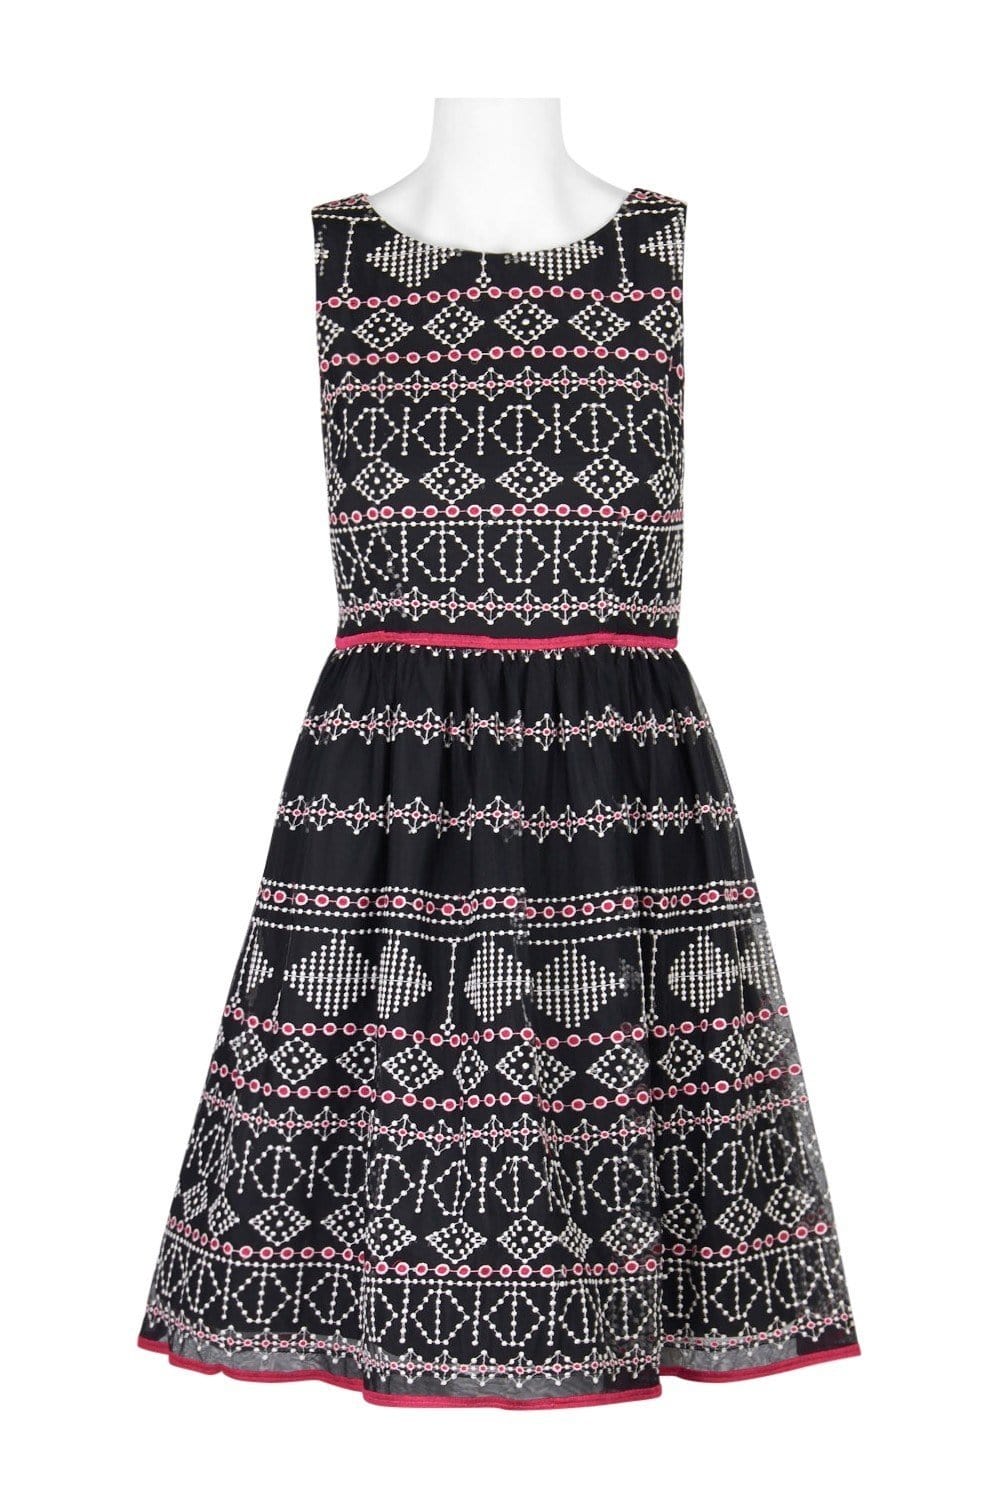 Taylor - 9722M Sleeveless Piped Multi-Print A-Line Dress In Black